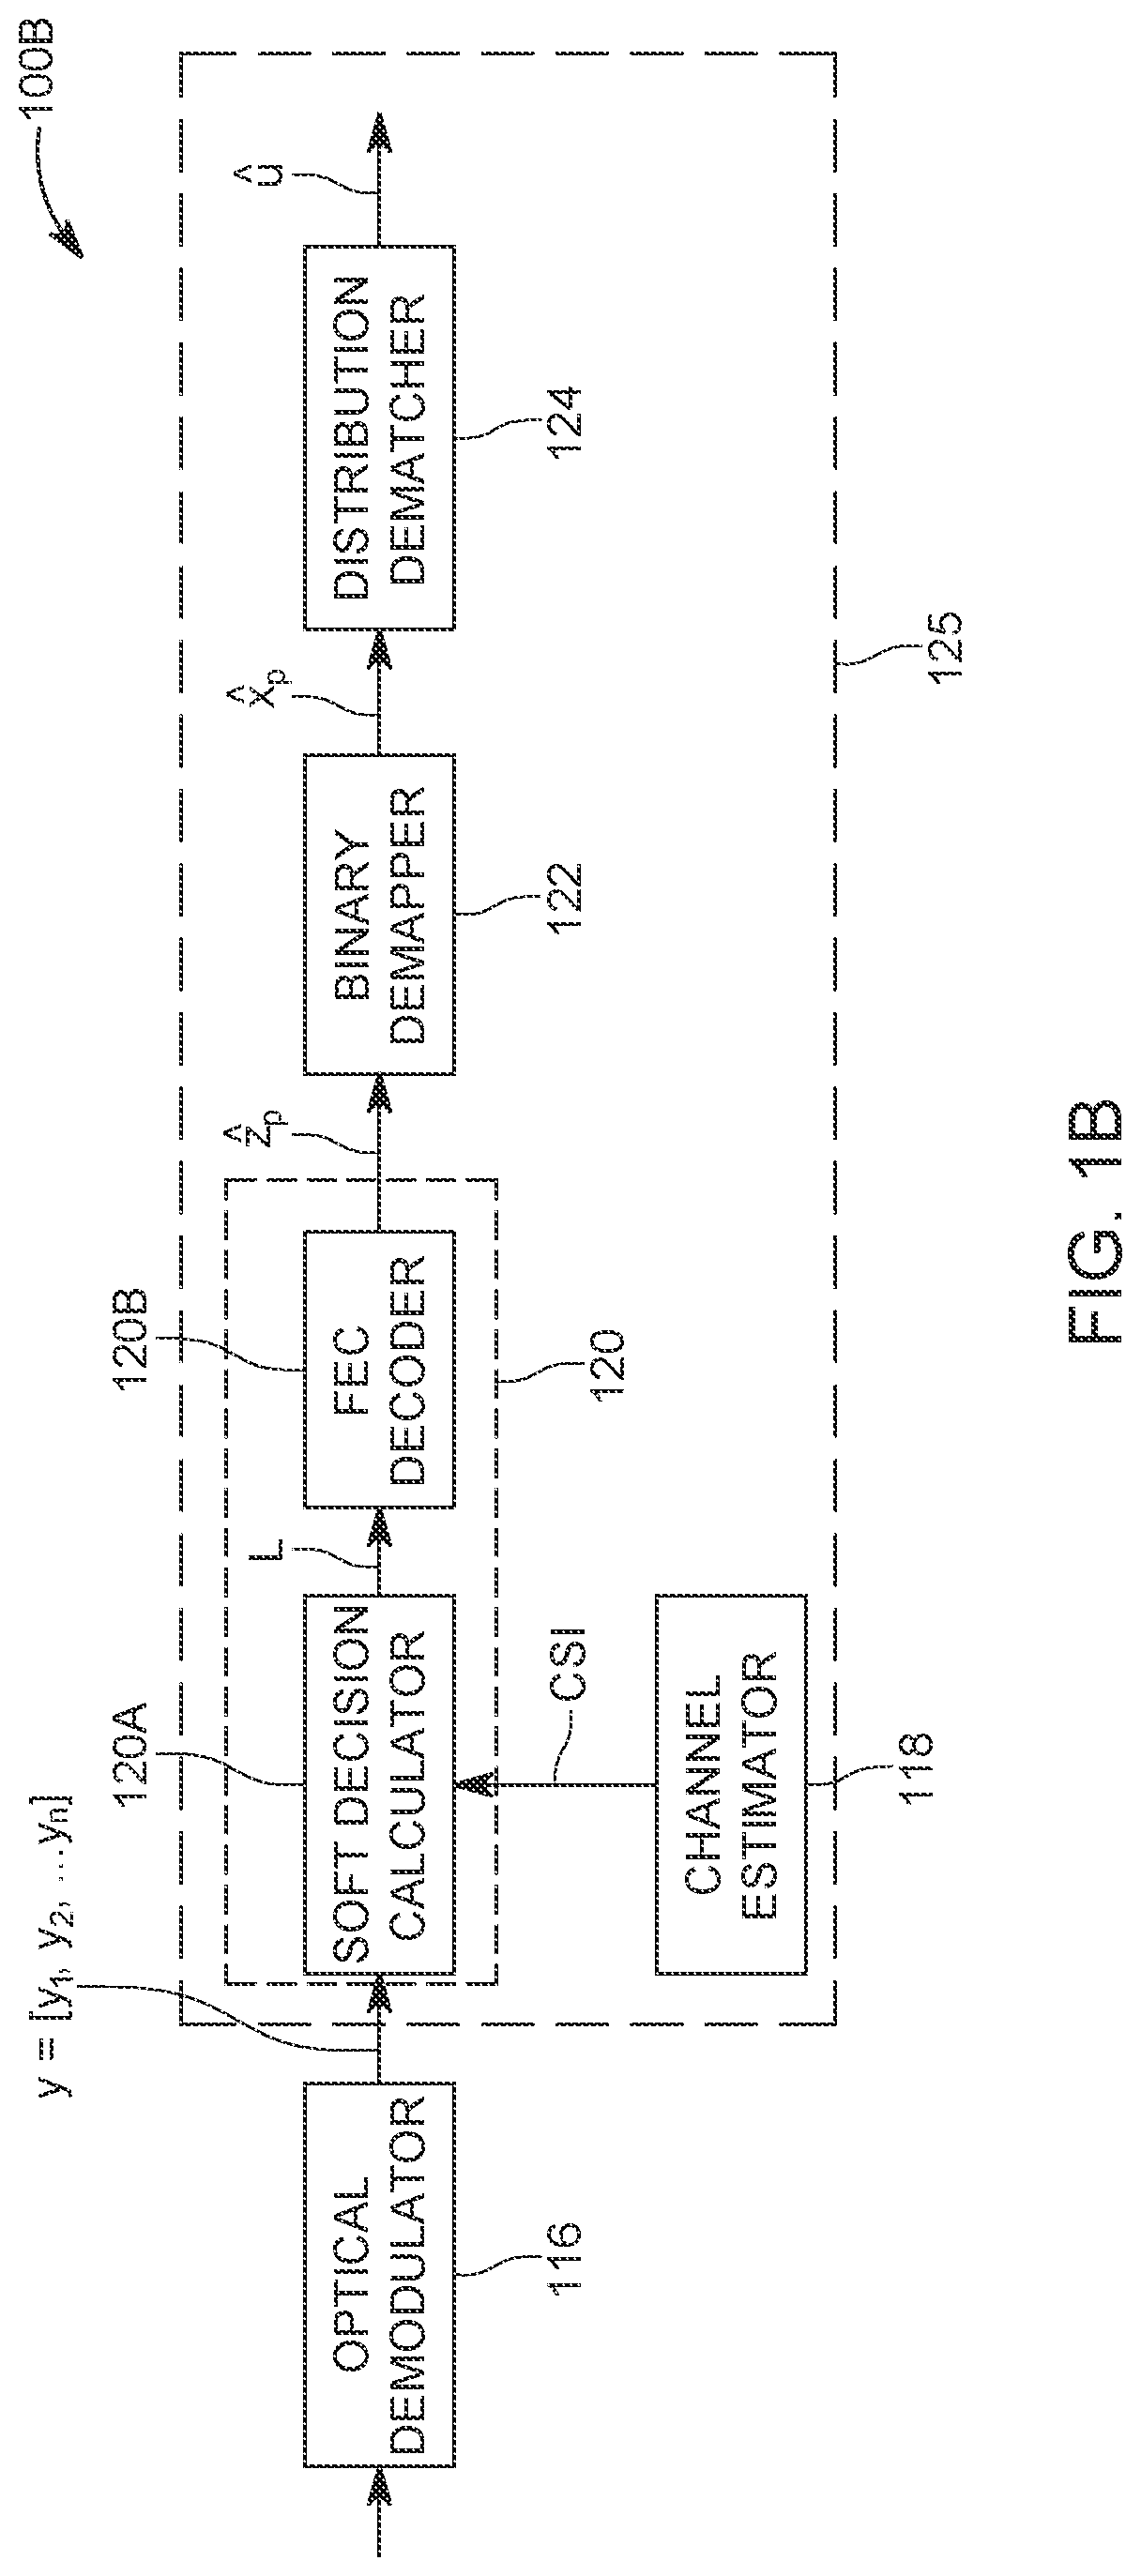 Communicating over a free-space optical channel using distribution matching